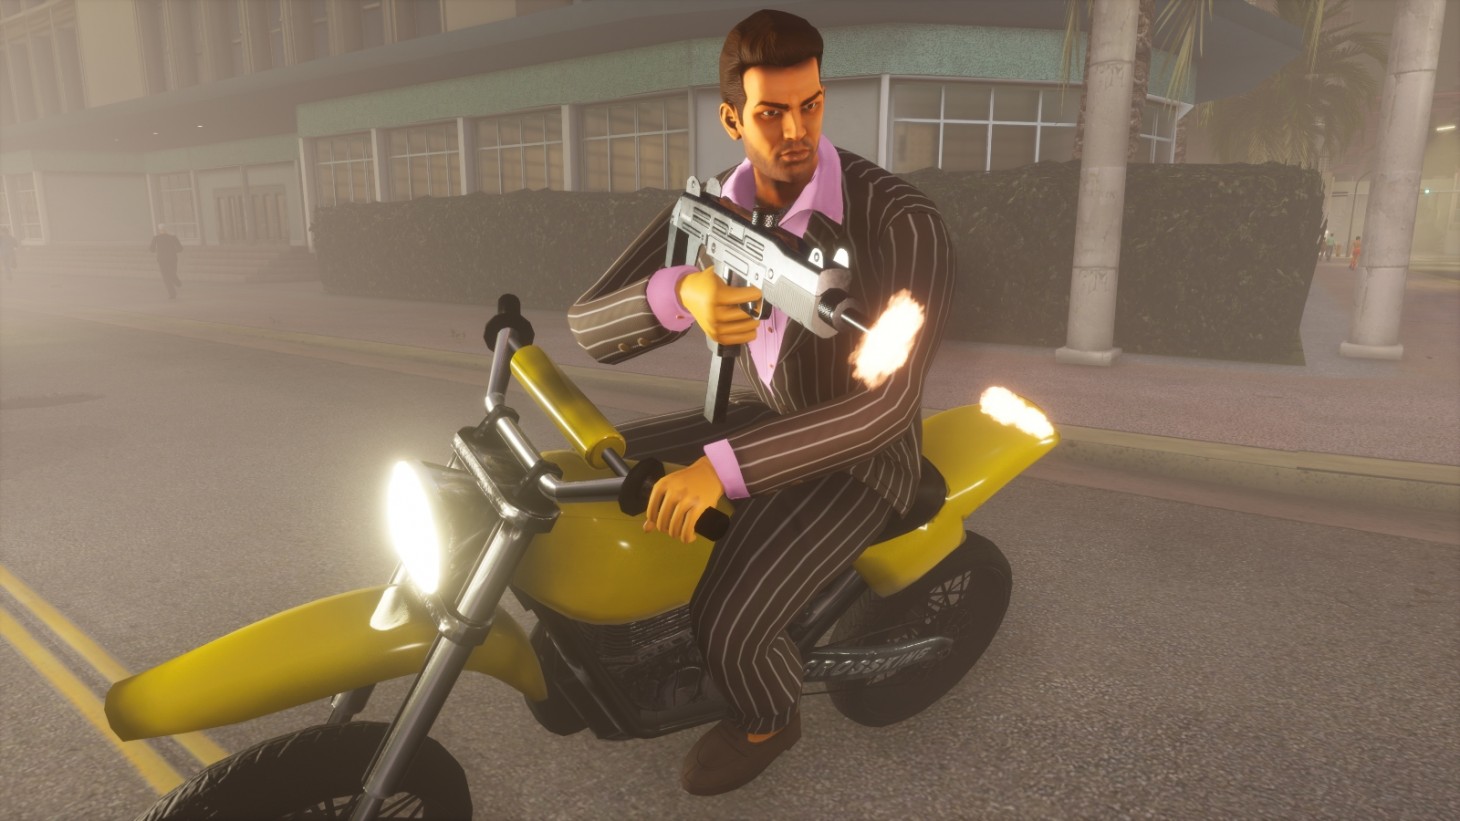 GTA: The Trilogy Definitive Edition available for half the price